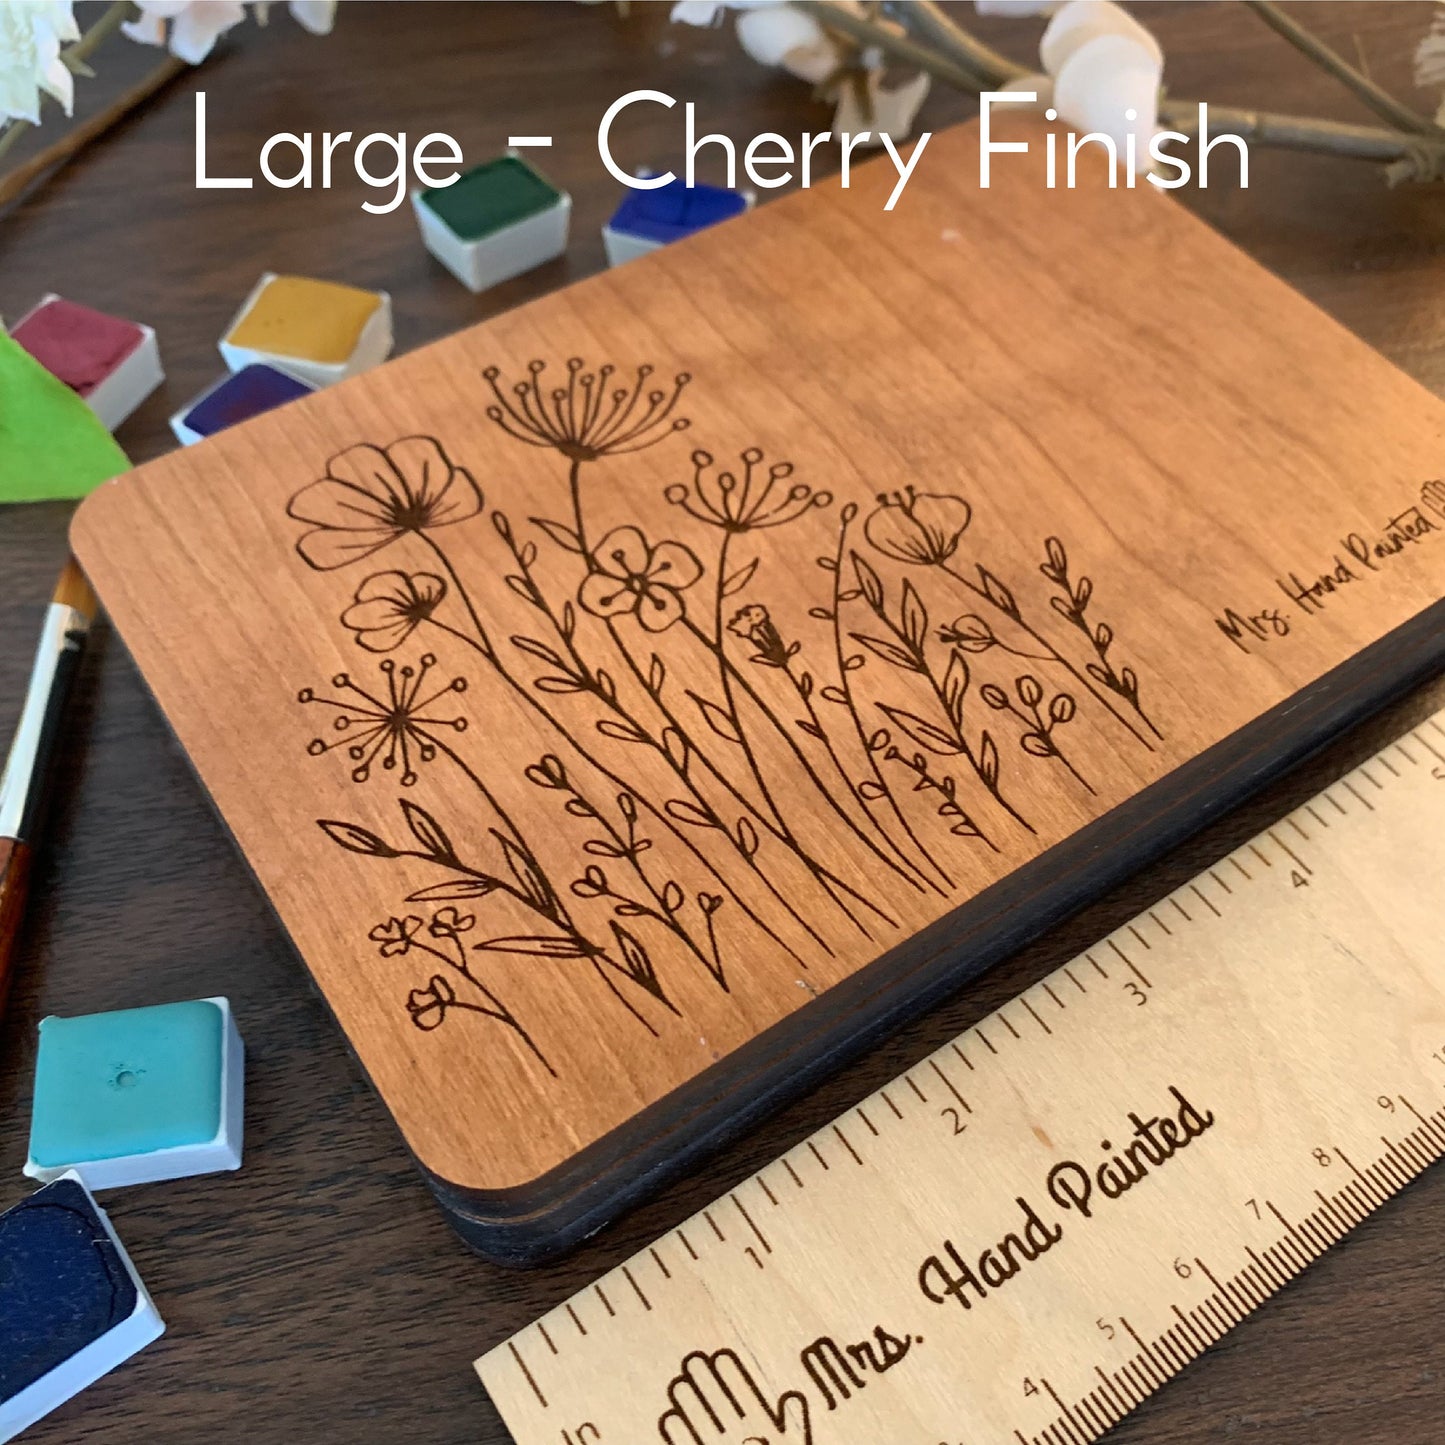 Custom Engraved Wood Watercolor Box with Personalization